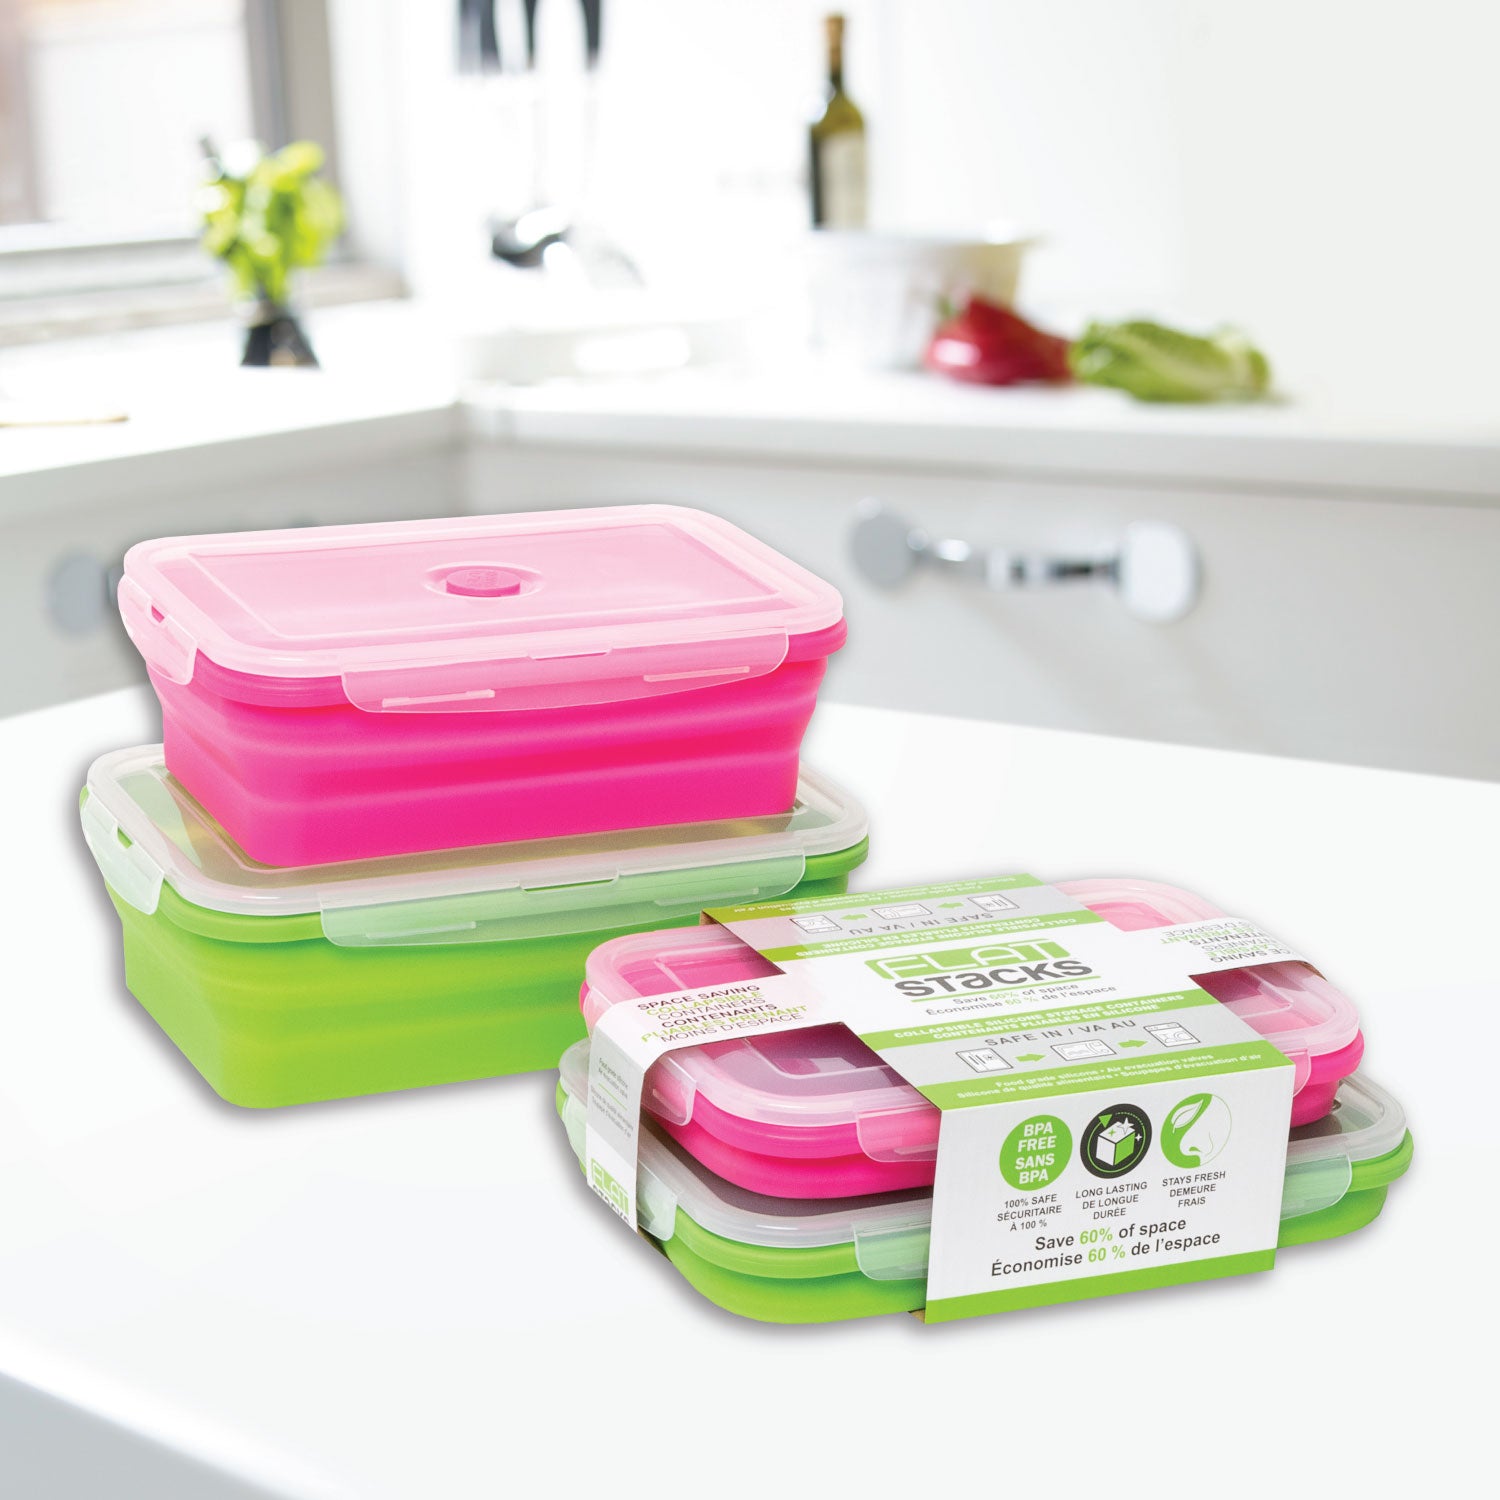 These Flat Stacks Collapsible Silicone Storage Containers are